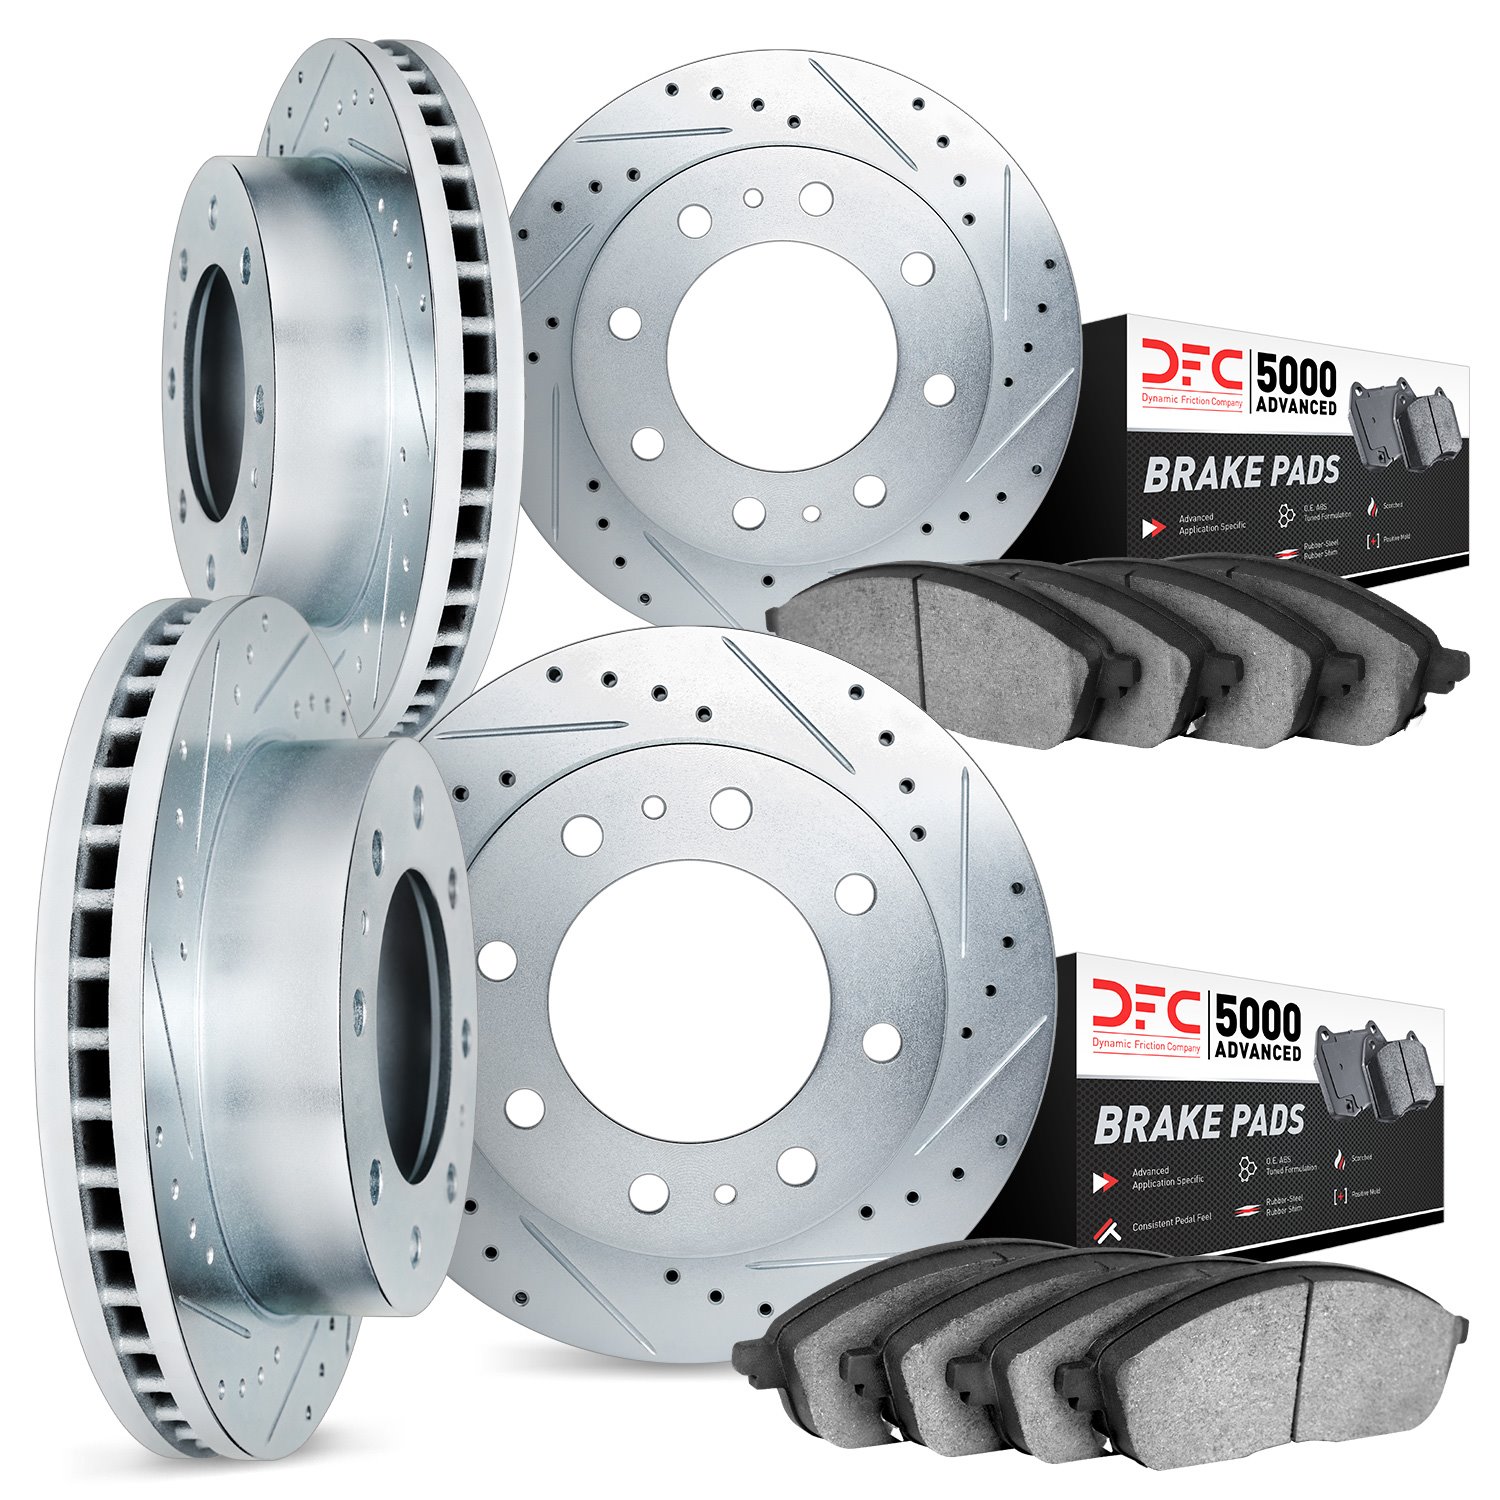 7504-48047 Drilled/Slotted Brake Rotors w/5000 Advanced Brake Pads Kit [Silver], 2011-2019 GM, Position: Front and Rear